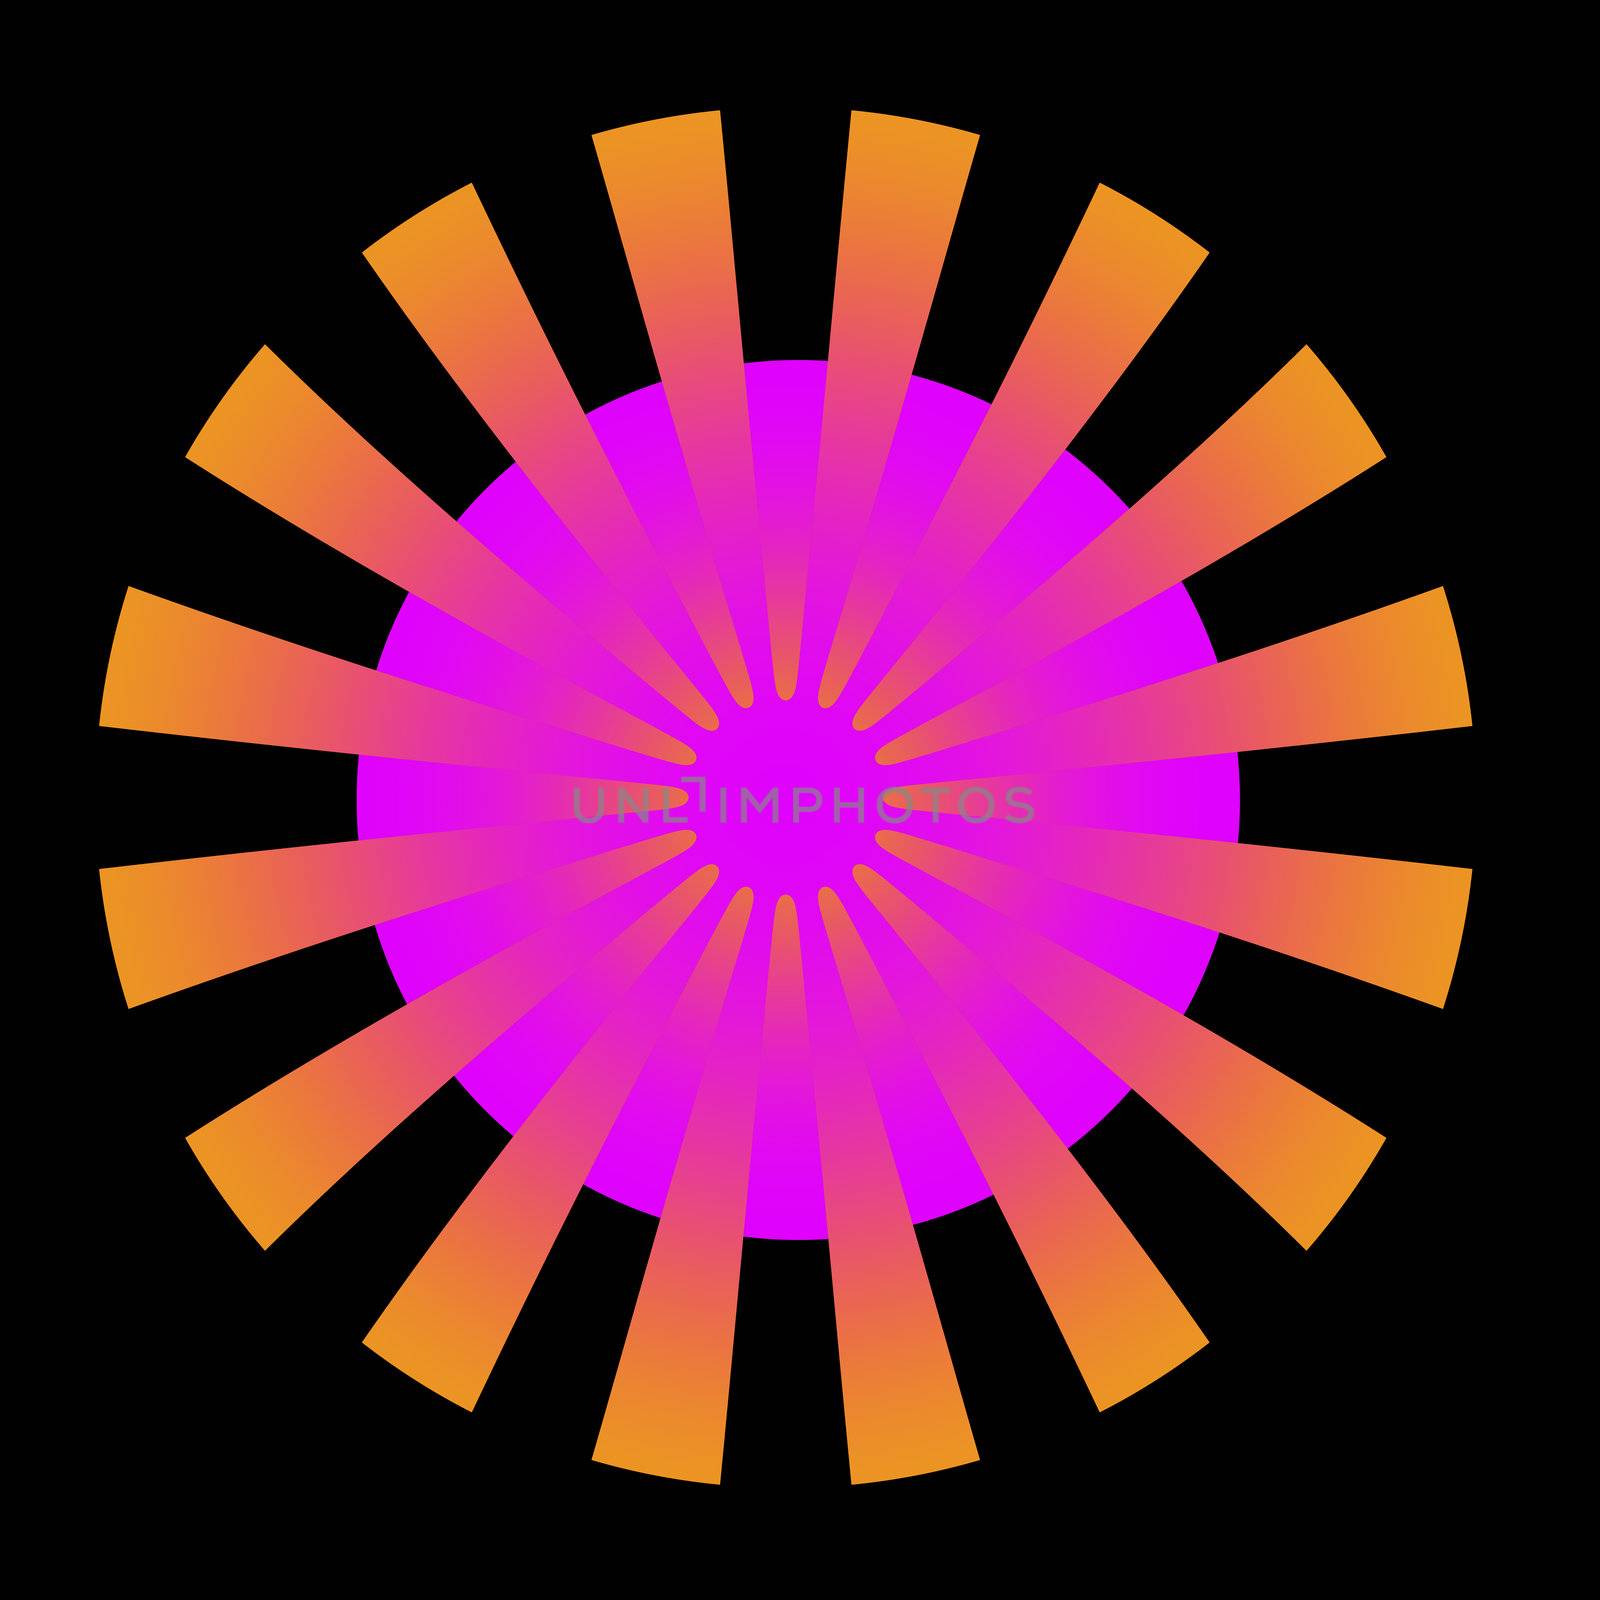 A circular abstract fractal done in shades of orange and pink.